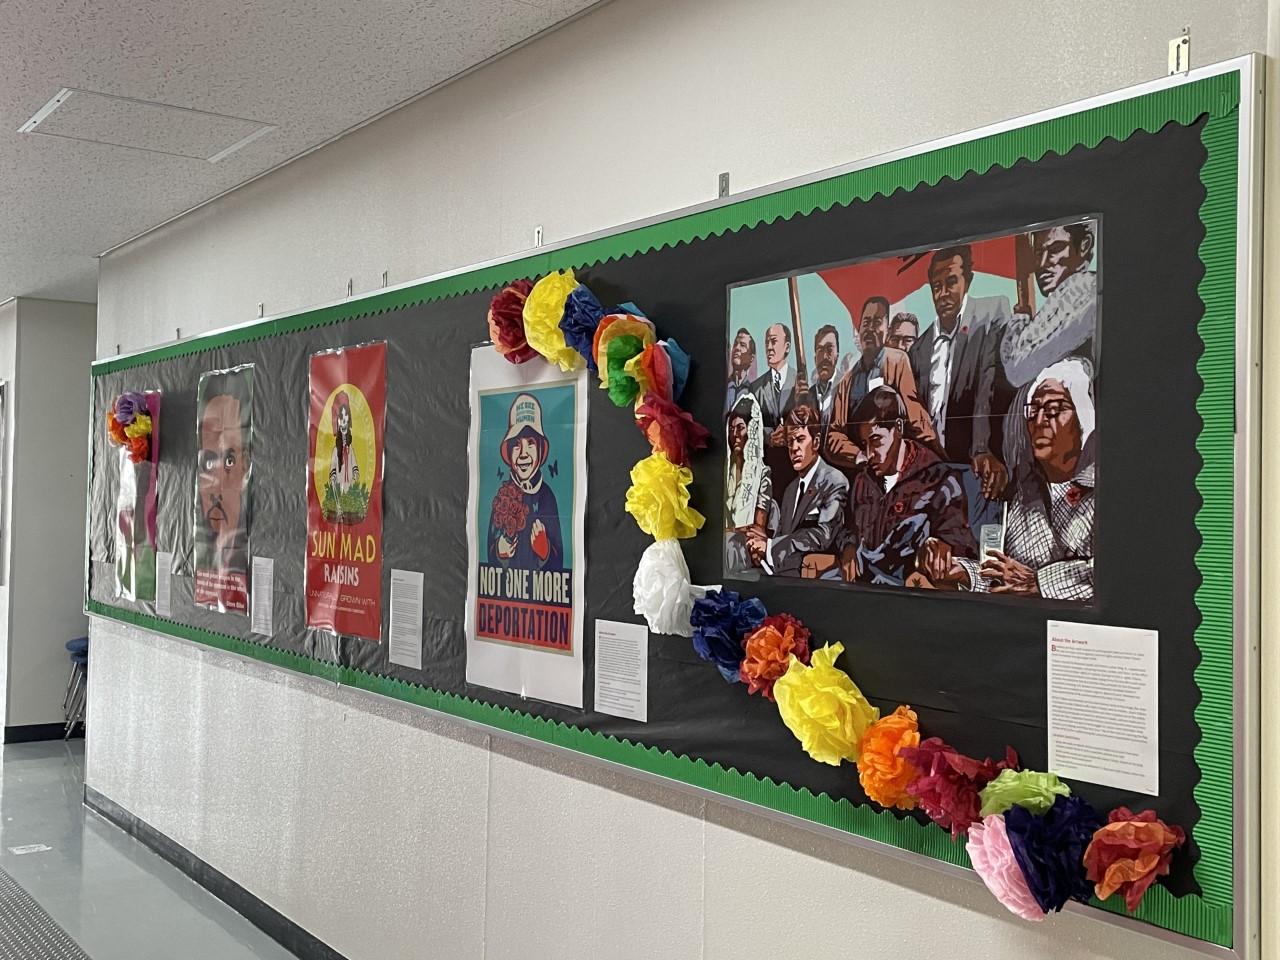 Posters on a school hallway bulletin board. They are decorated with paper flowers.